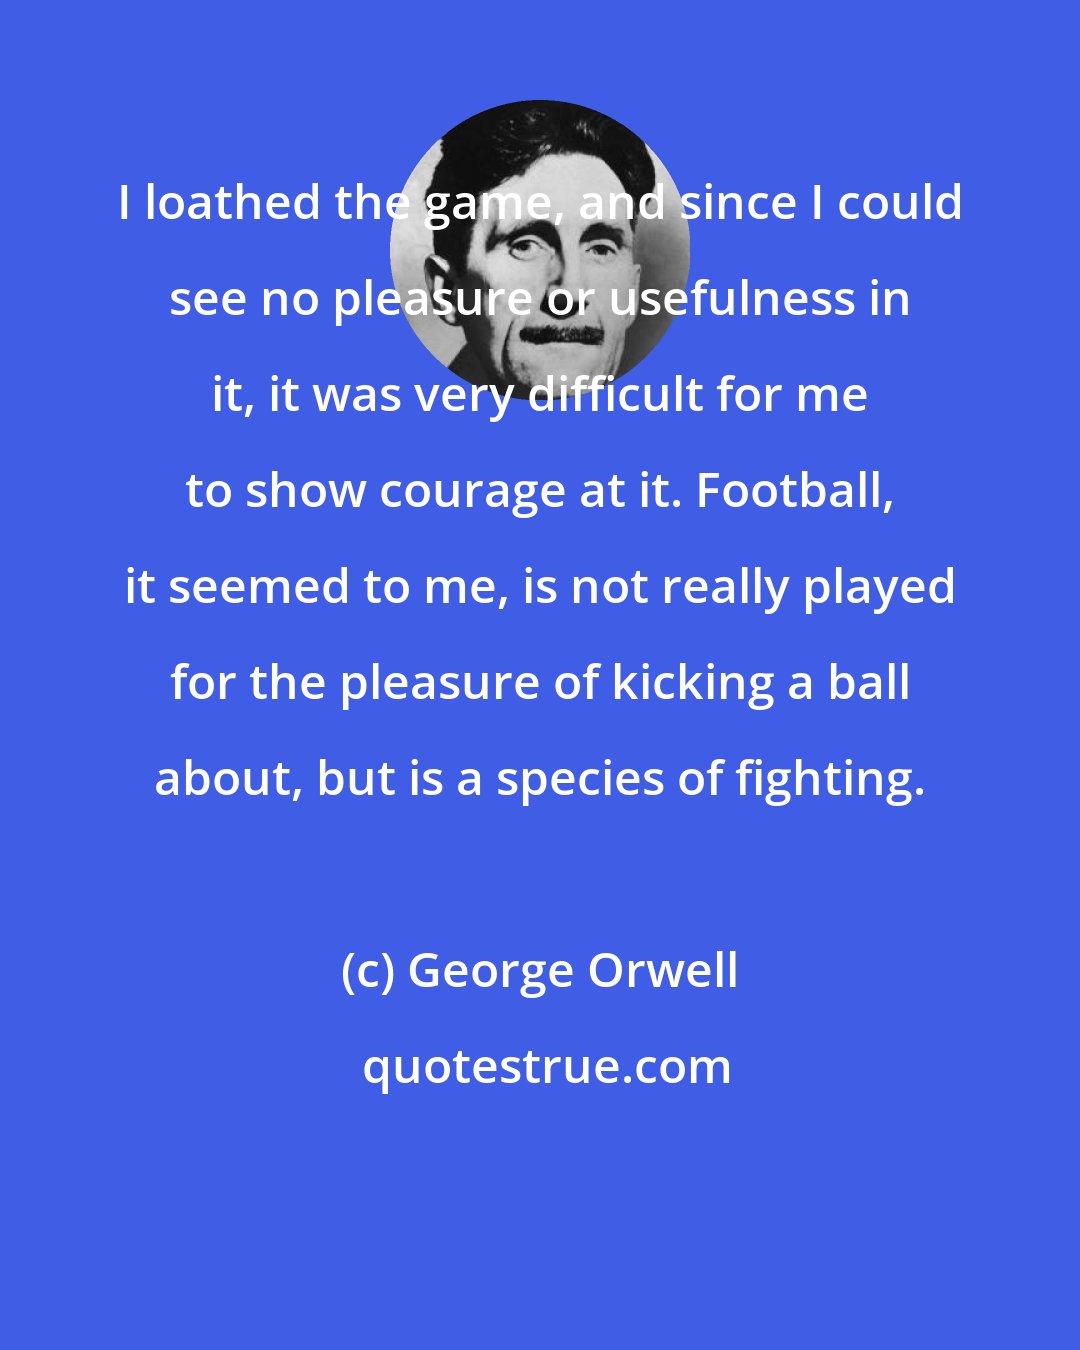 George Orwell: I loathed the game, and since I could see no pleasure or usefulness in it, it was very difficult for me to show courage at it. Football, it seemed to me, is not really played for the pleasure of kicking a ball about, but is a species of fighting.